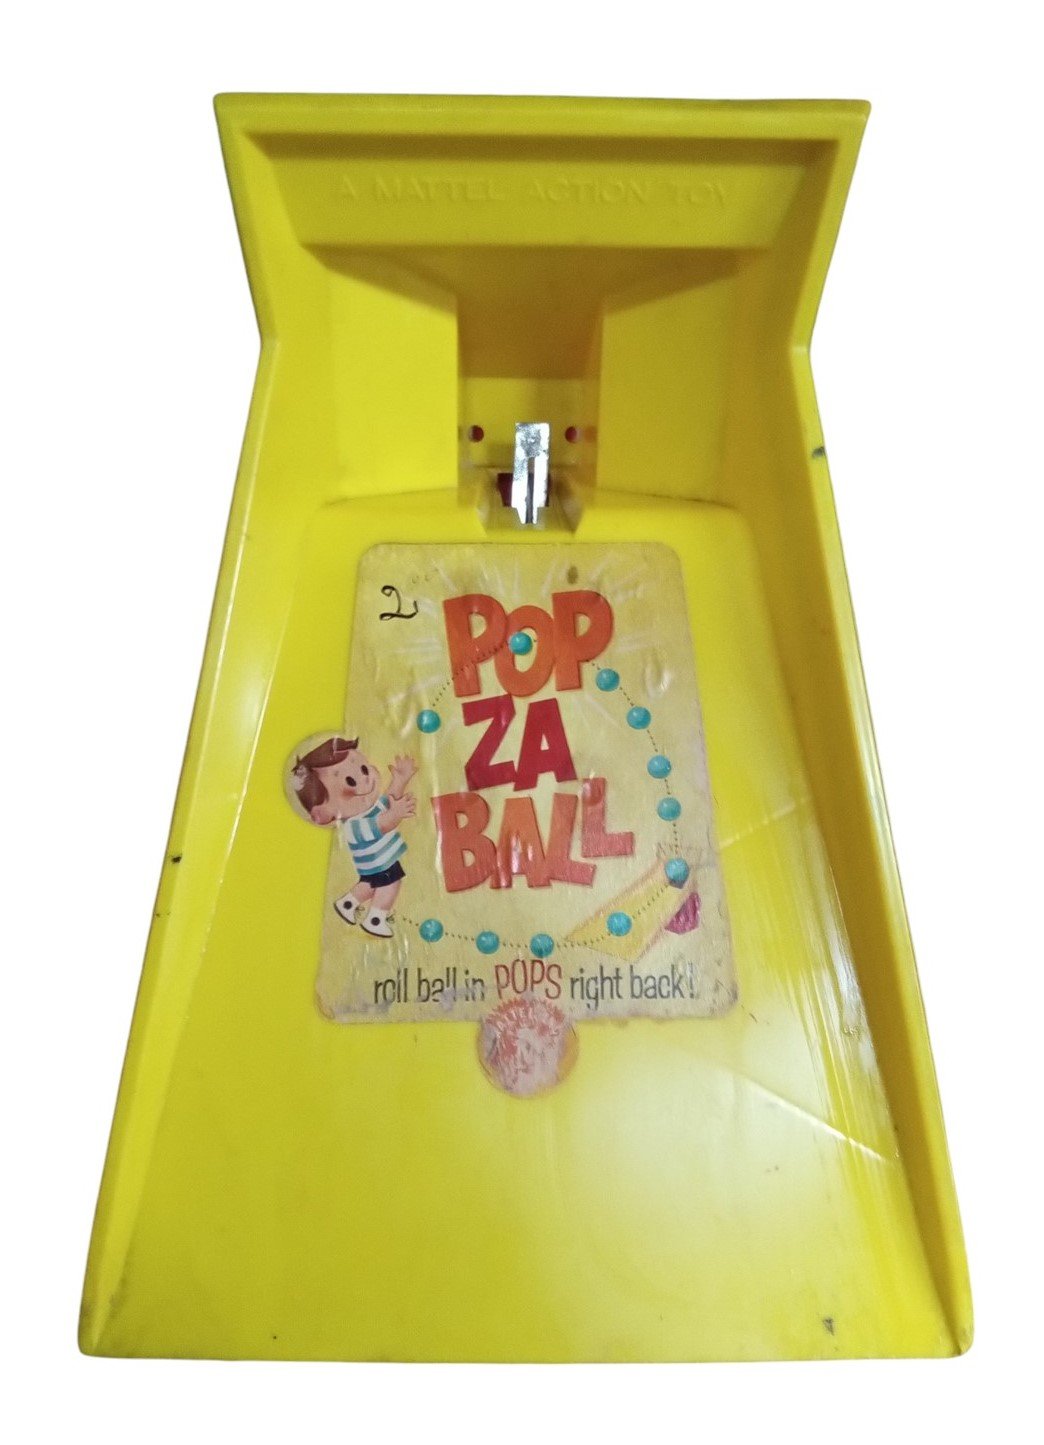 Mattel Pop Za Ball Game Vintage Collectible Ball Launching Rolling Toy